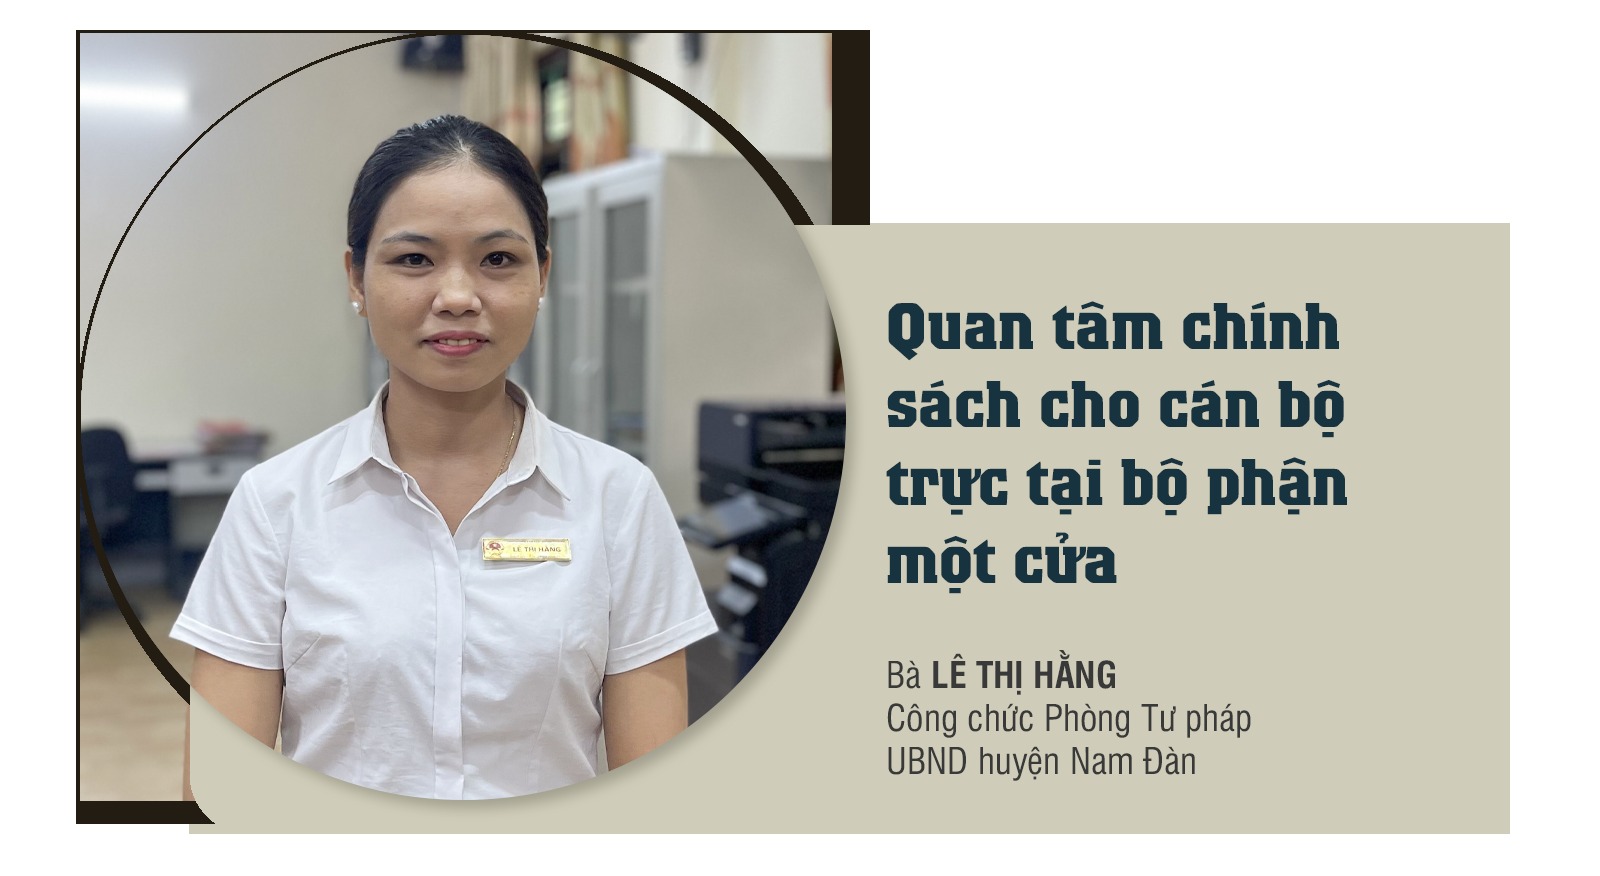 cu-tri-le-thi-hang-quoter-6136.jpg